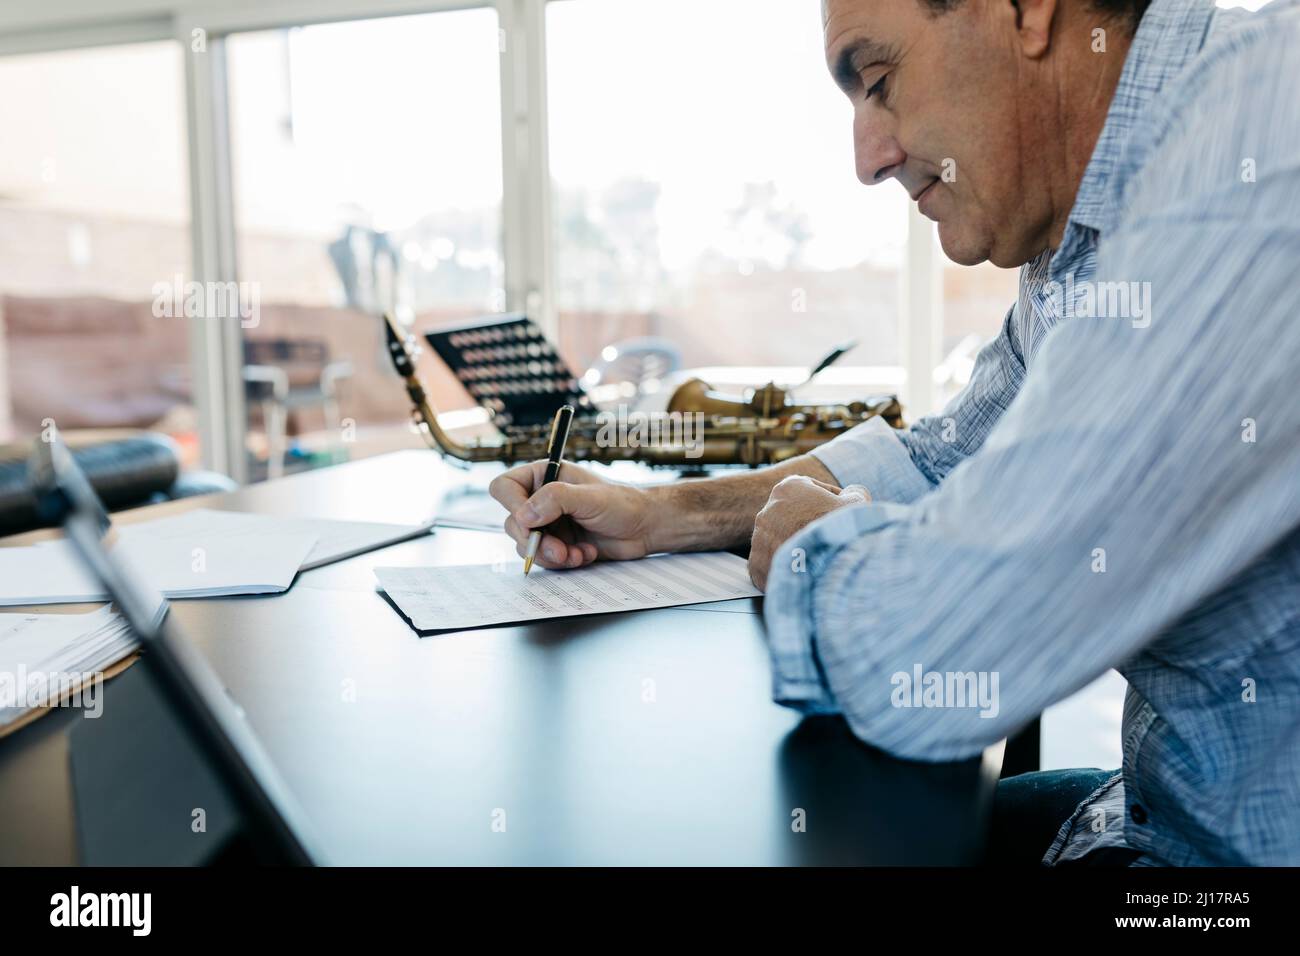 Man writing musical notes on paper sitting at table Stock Photo